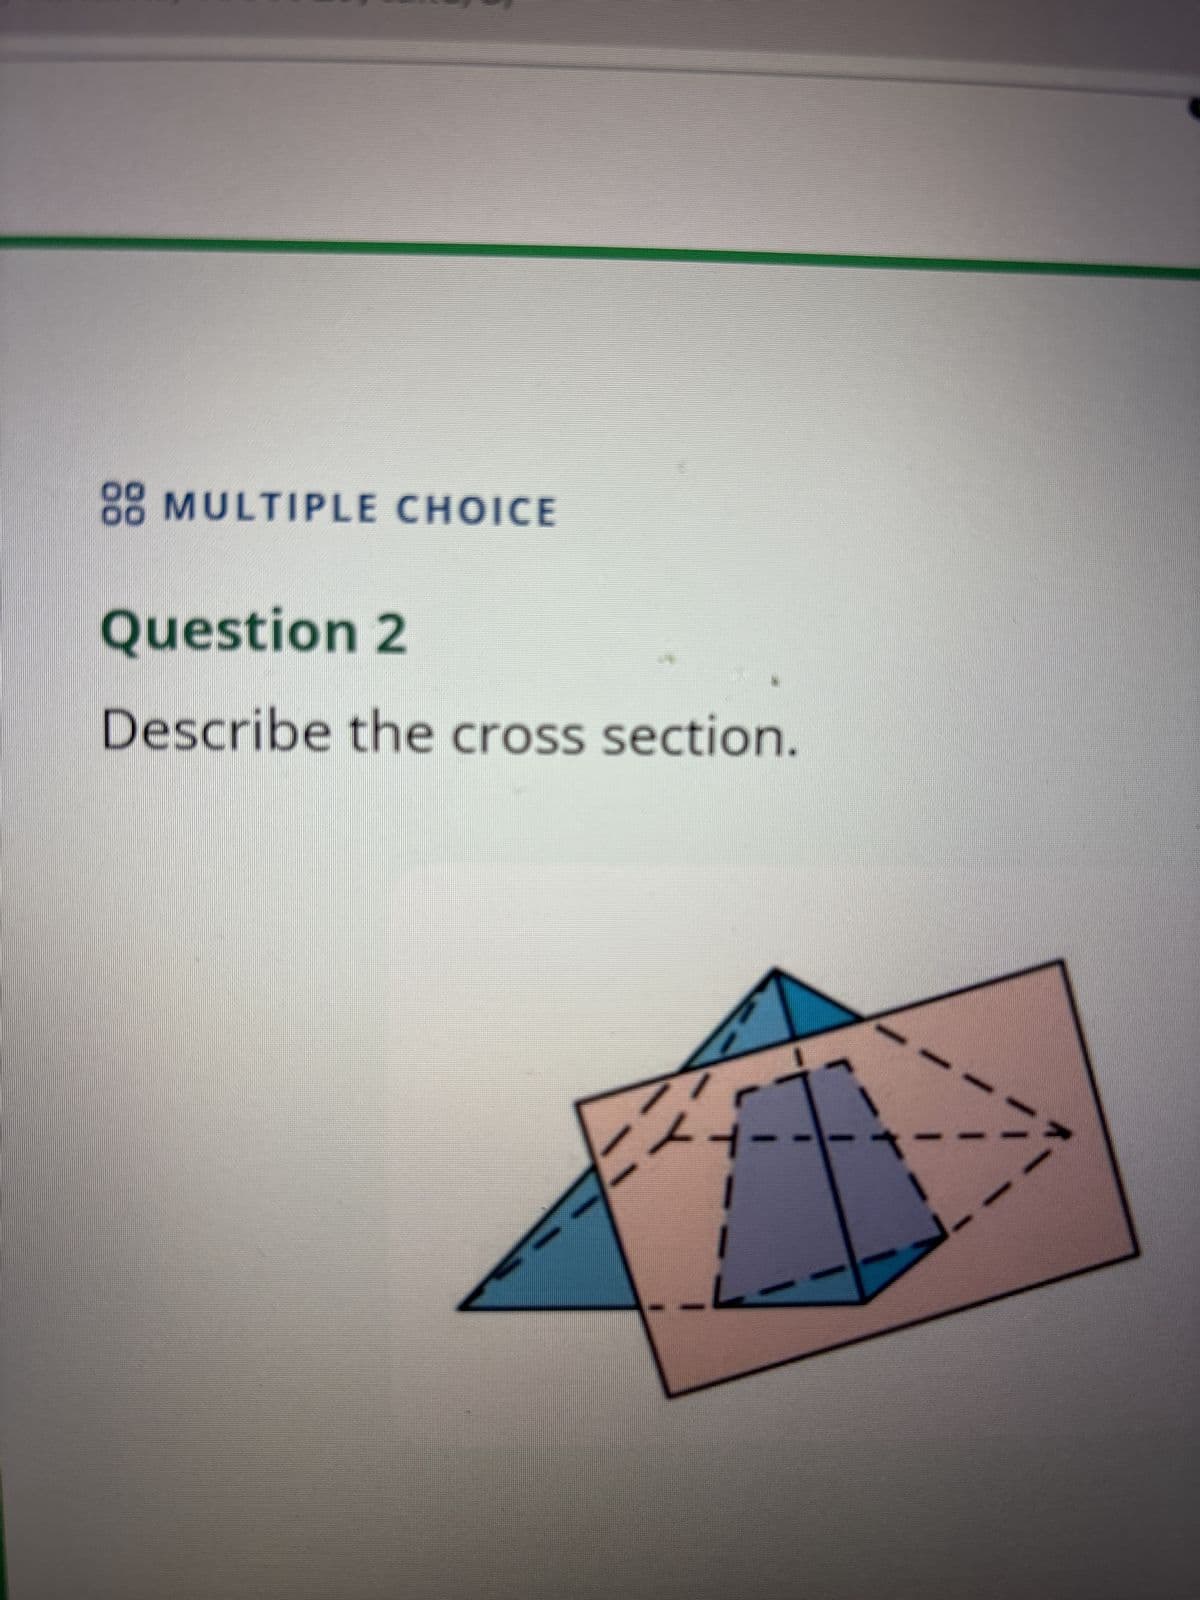 88 MULTIPLE CHOICE
Question 2
Describe the cross section.